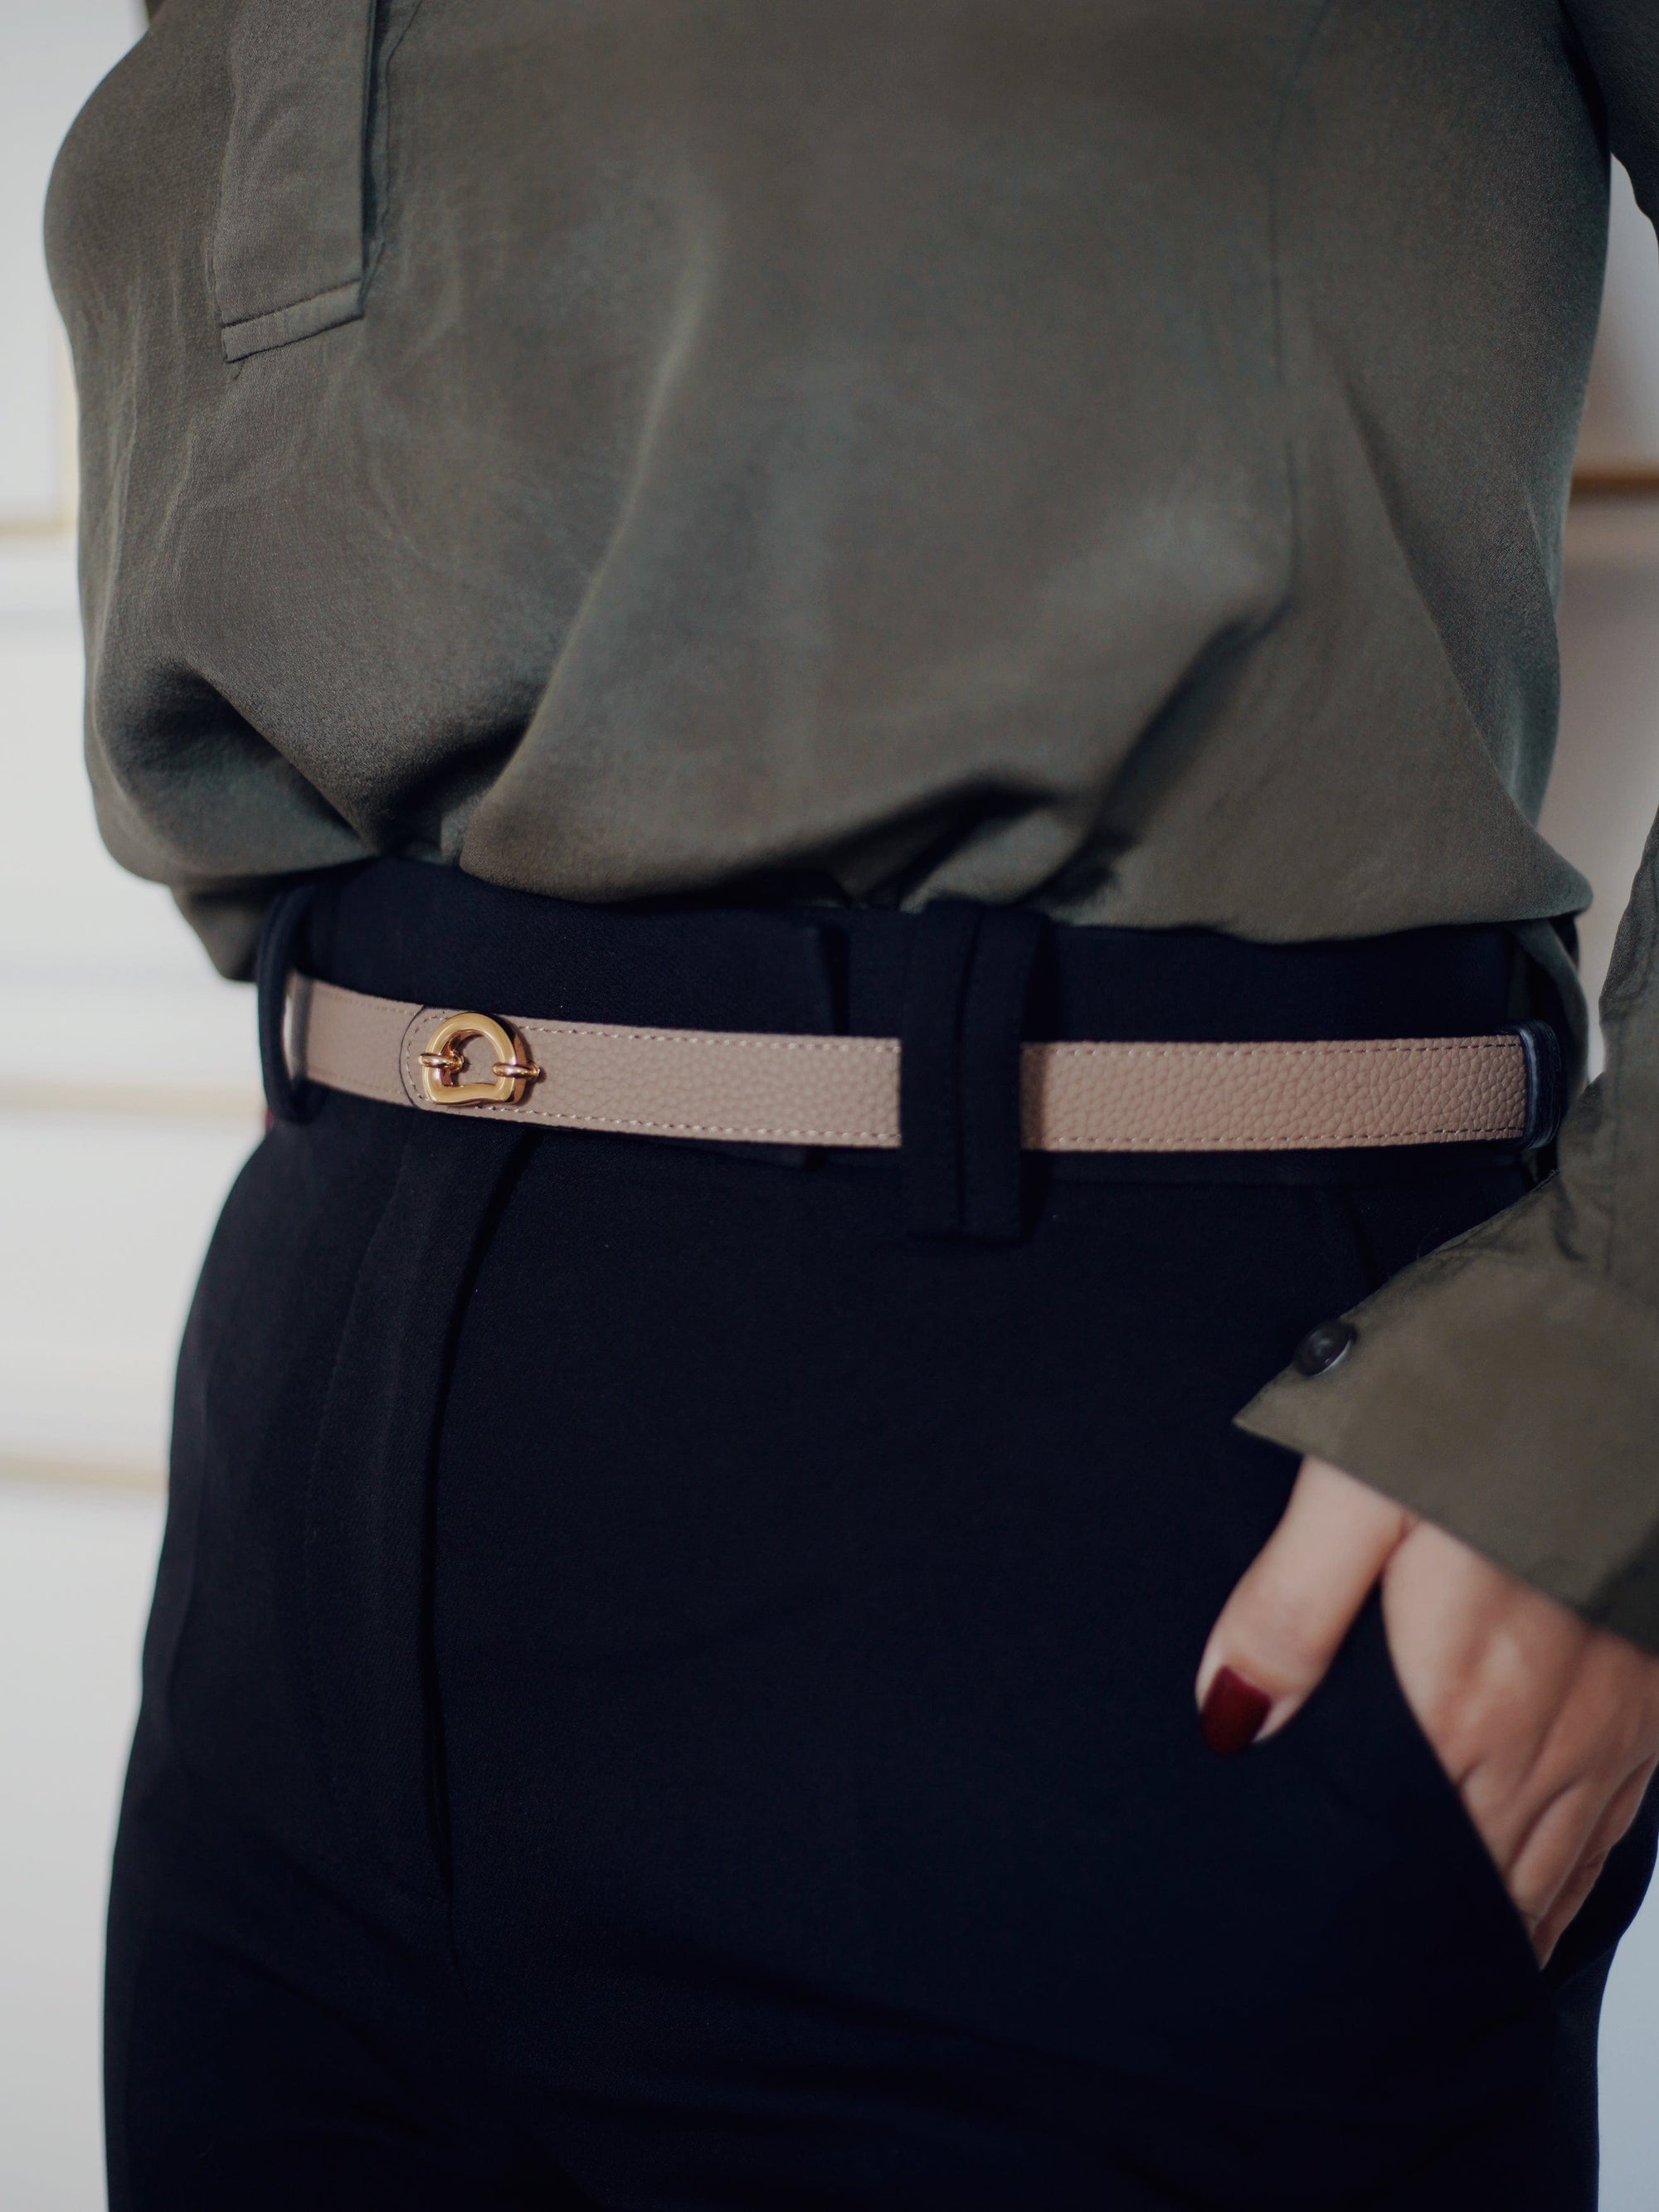 OLEADA Apparel and Accessories > Women > Small Leather Goods > Leather Belt Sunrise Reversible Belt